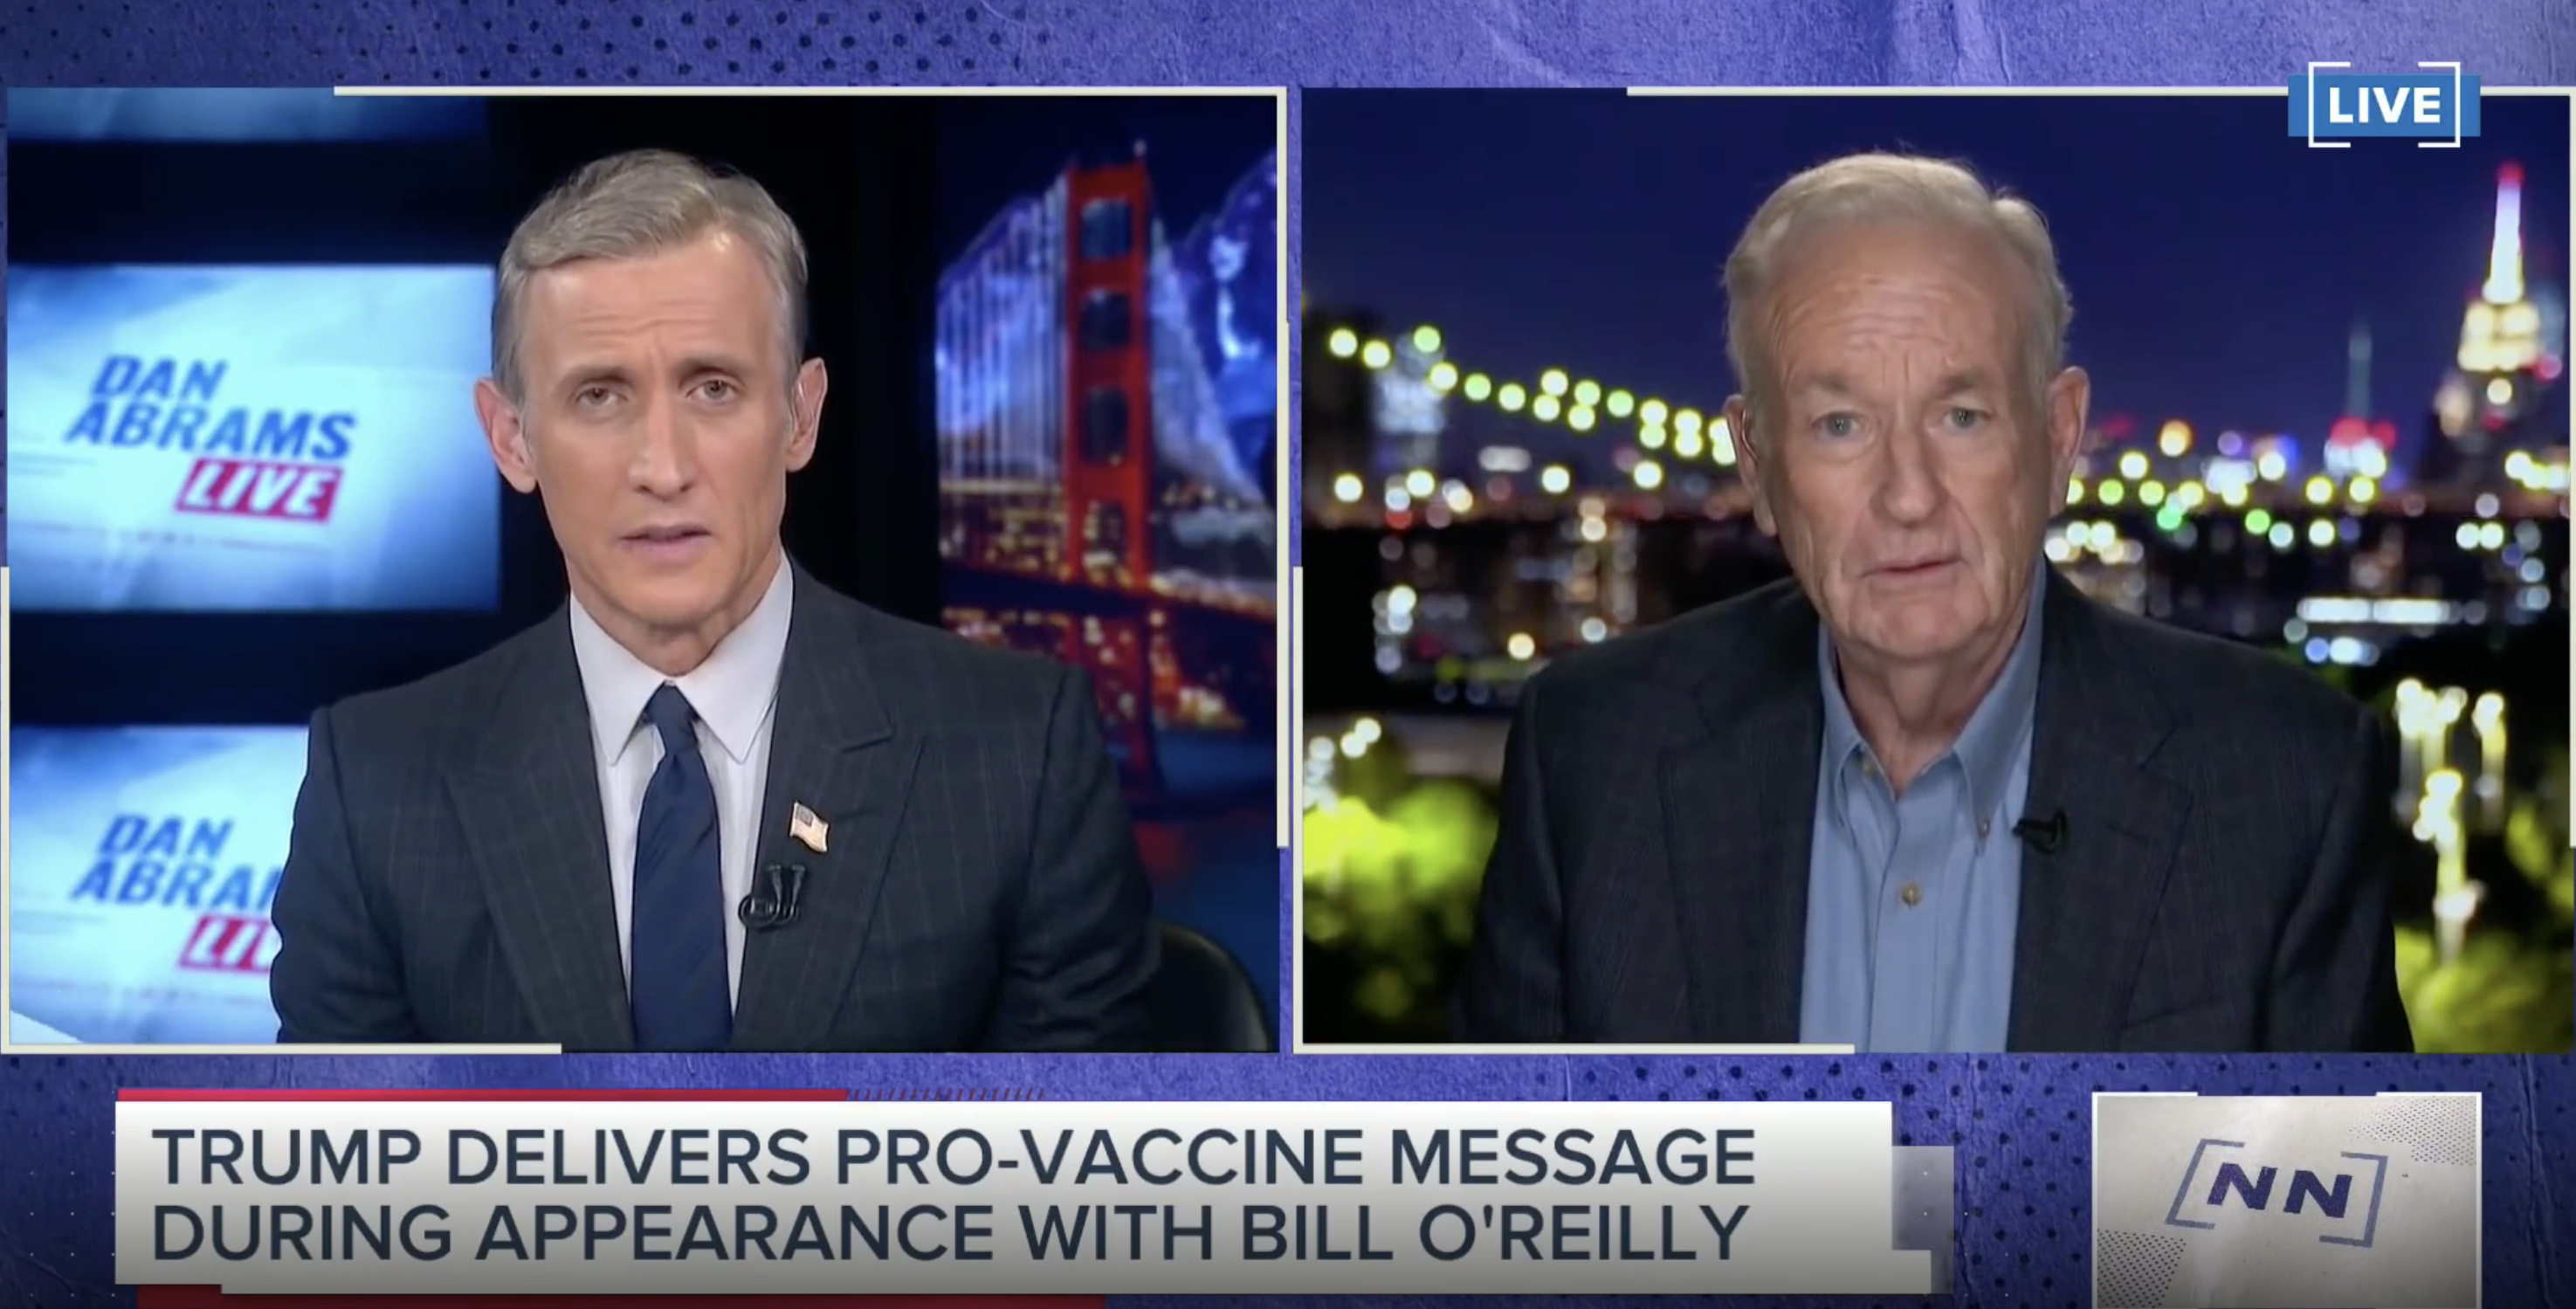 O'Reilly Spars With Abrams Over Vaccine Opinions